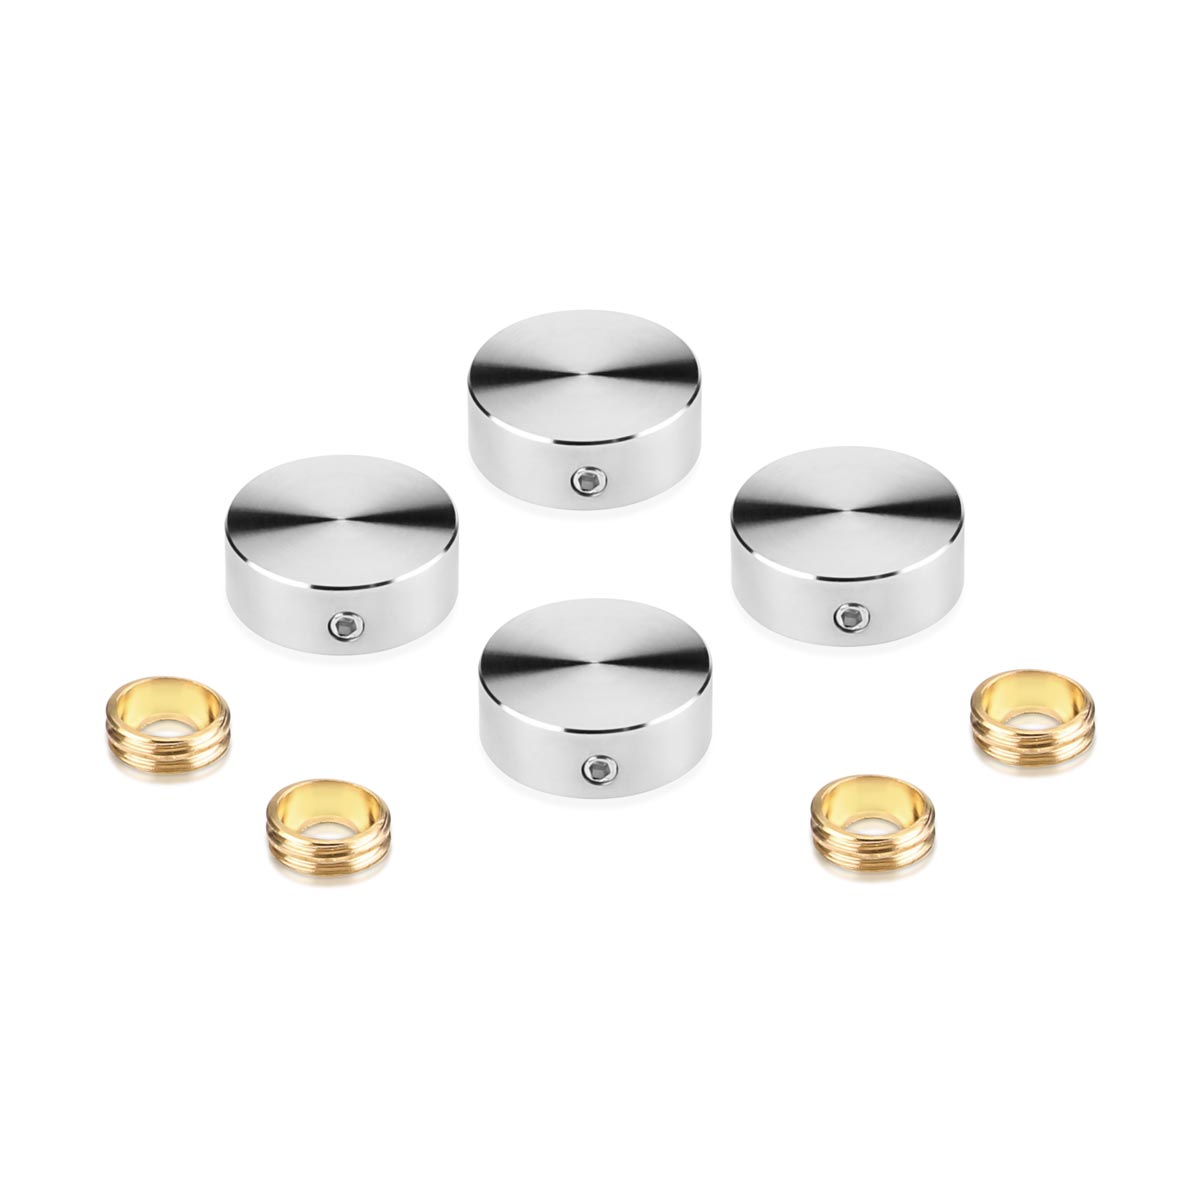 Set of 4 Locking Screw Cover Diameter 11/16'', Satin Brushed Stainless Steel Finish (Indoor or Outdoor)